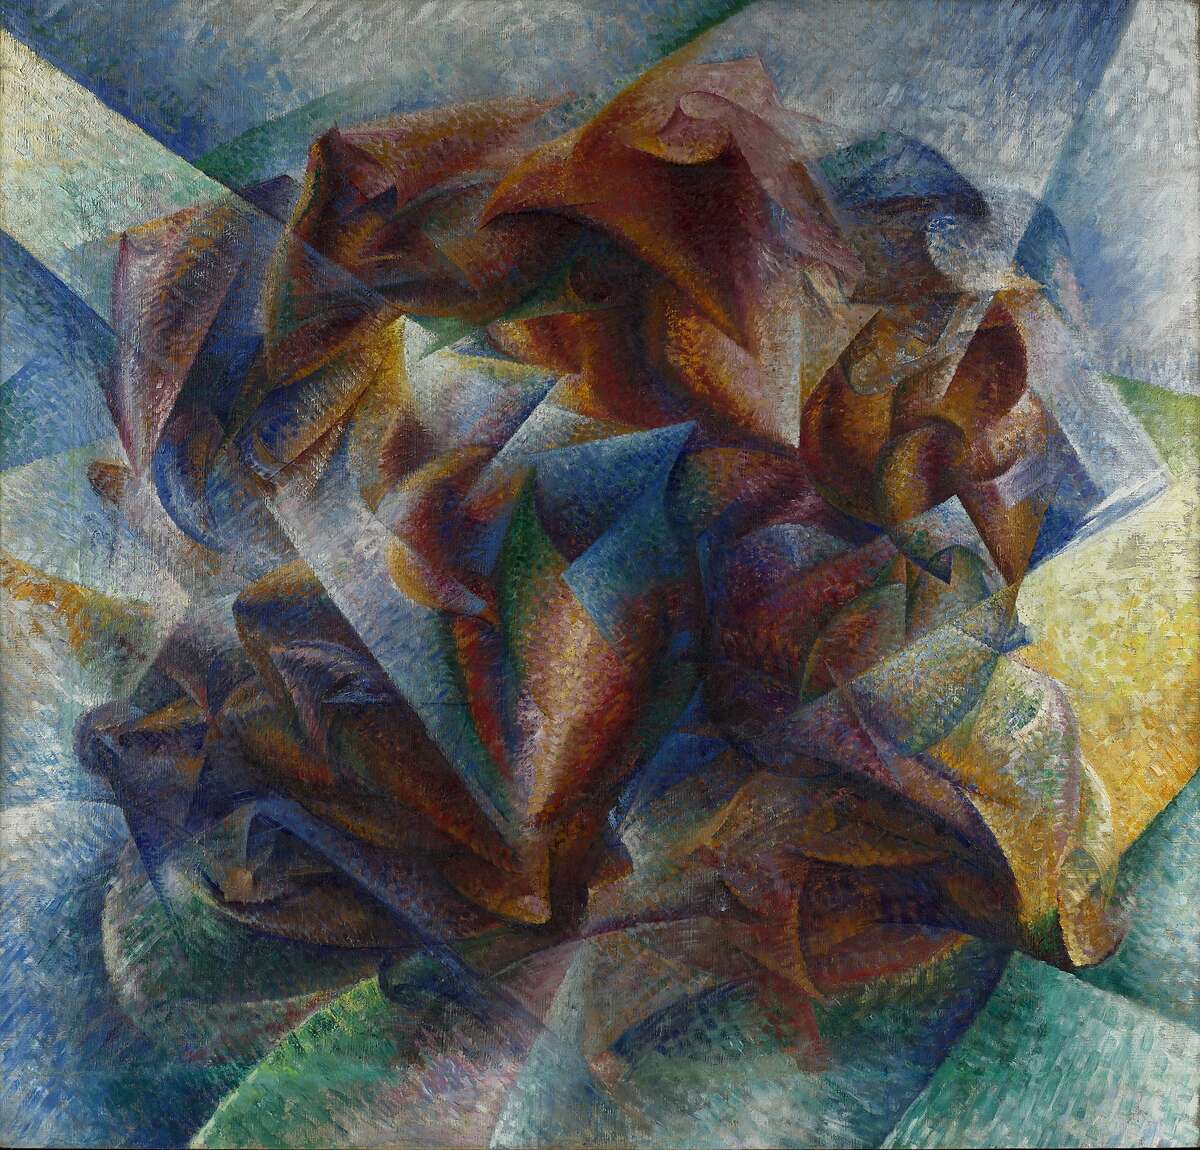 Italian Futurist Umberto Boccioni’s 1913 oil painting, “Dynamism of a Soccer Player,” is one of two hundred works in the exhibition “Jewel City: Art from San Francisco’s Panama-Pacific International Exposition” at the de Young Museum.